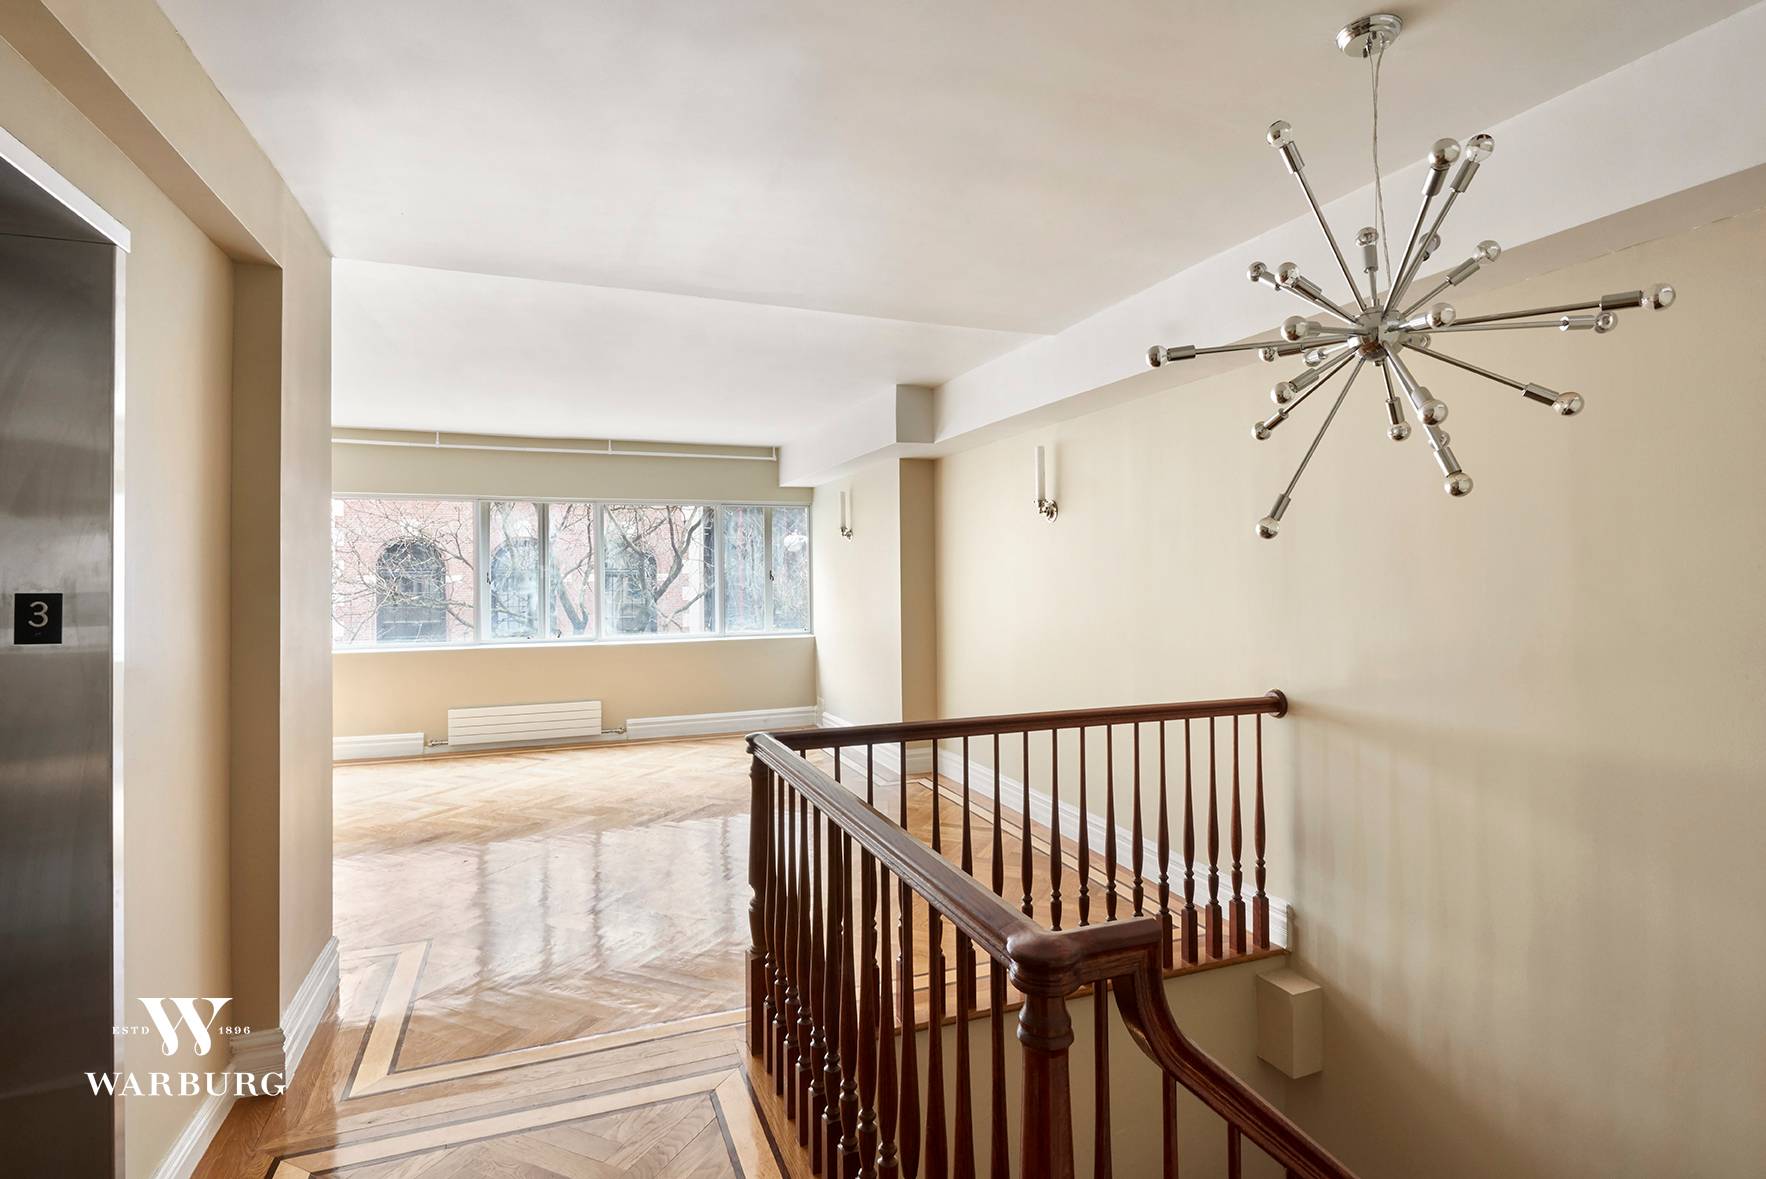 Duplex 2 Available on the market for the first time, Duplex 2 at 32 East 74th Street presents a wonderful opportunity to rent a spacious, well designed and newly renovated ...